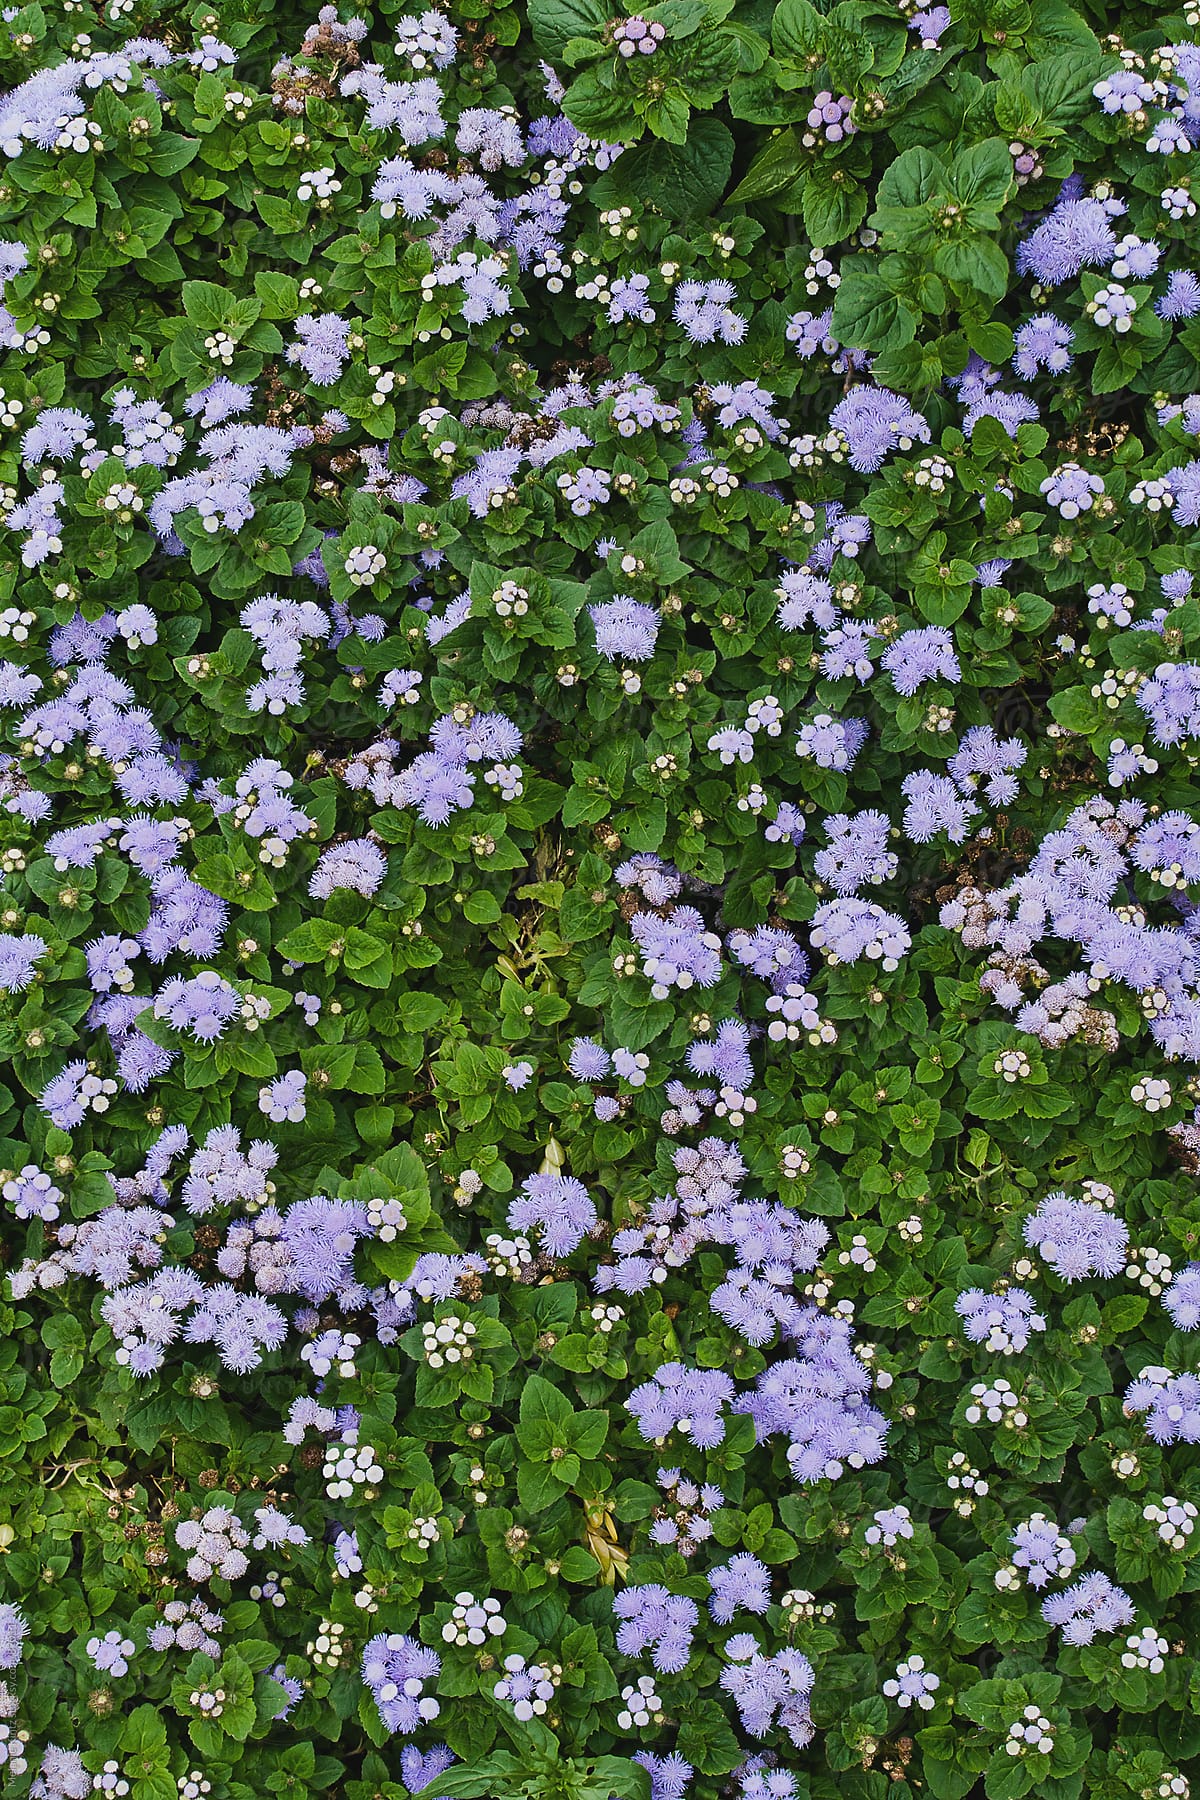 Patterned background of green leaves and purple flowers